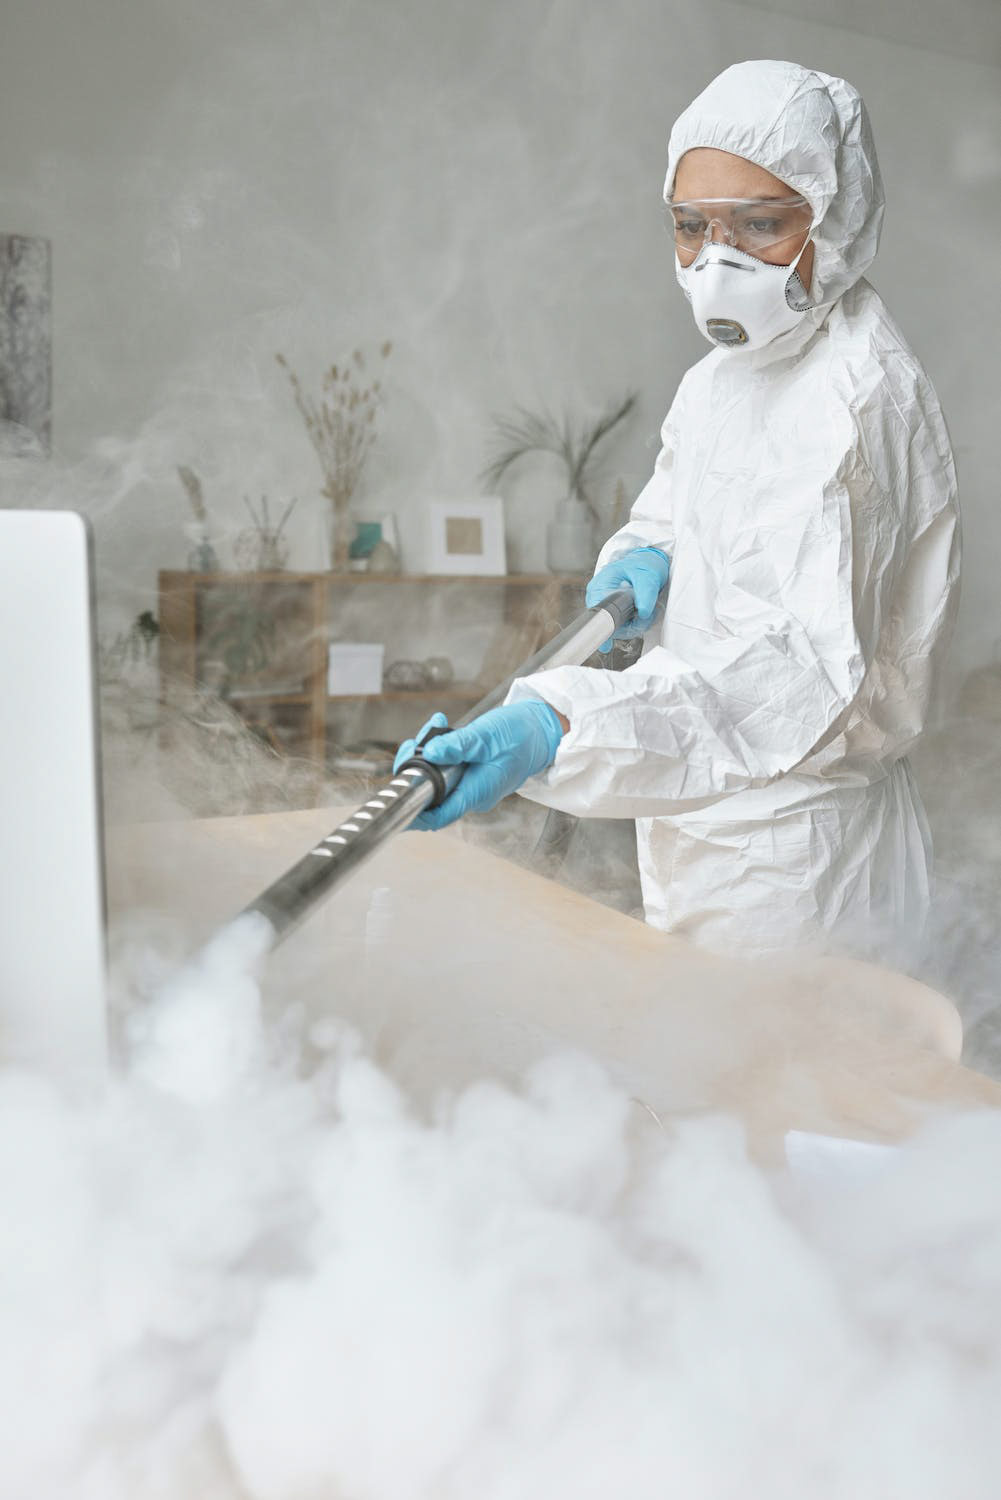 The cleaning and decontamination of crime scenes is a specialised process that requires care and consideration as well as the use of tailored equipment and products.  